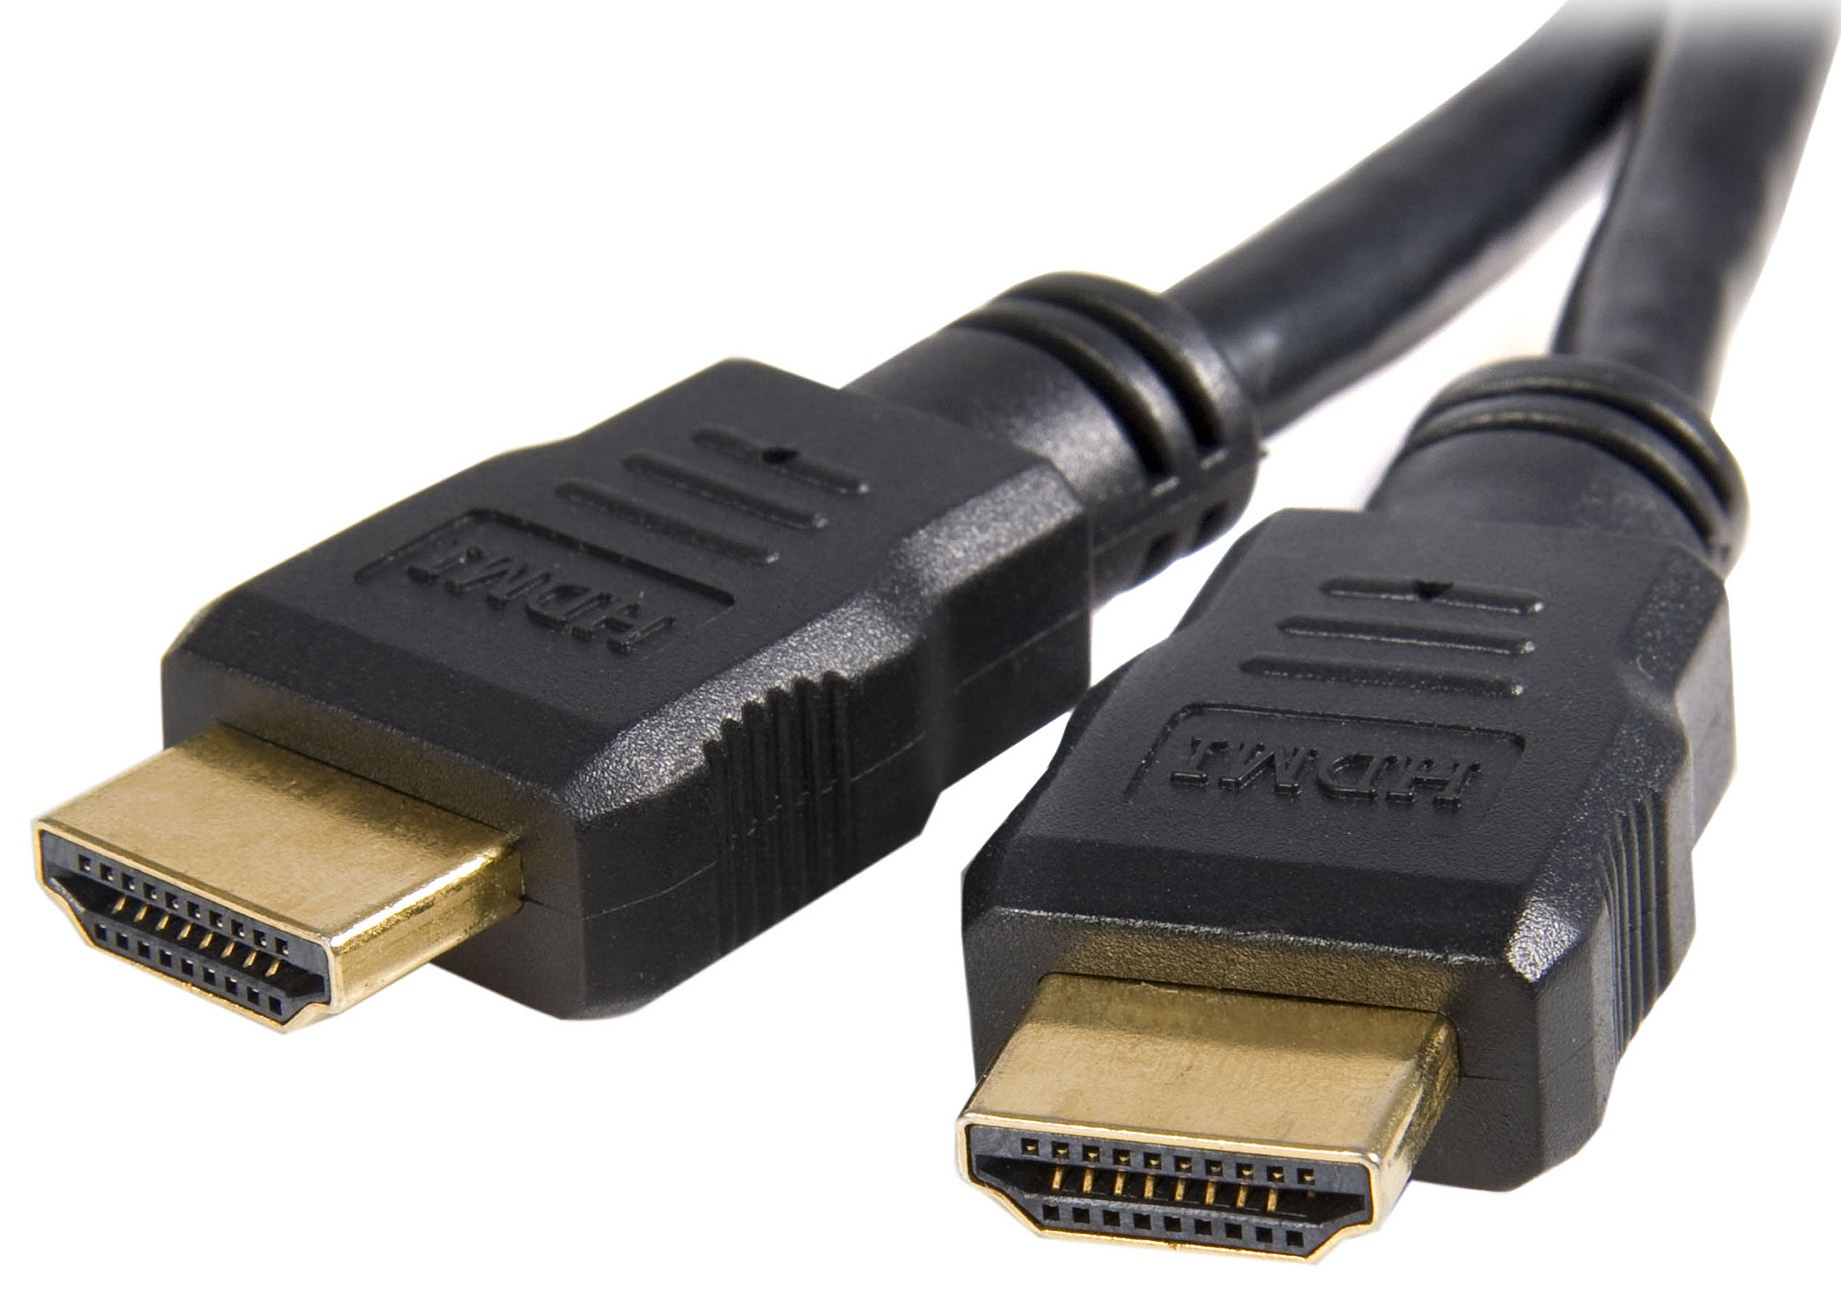 HDMI cable (image 001)